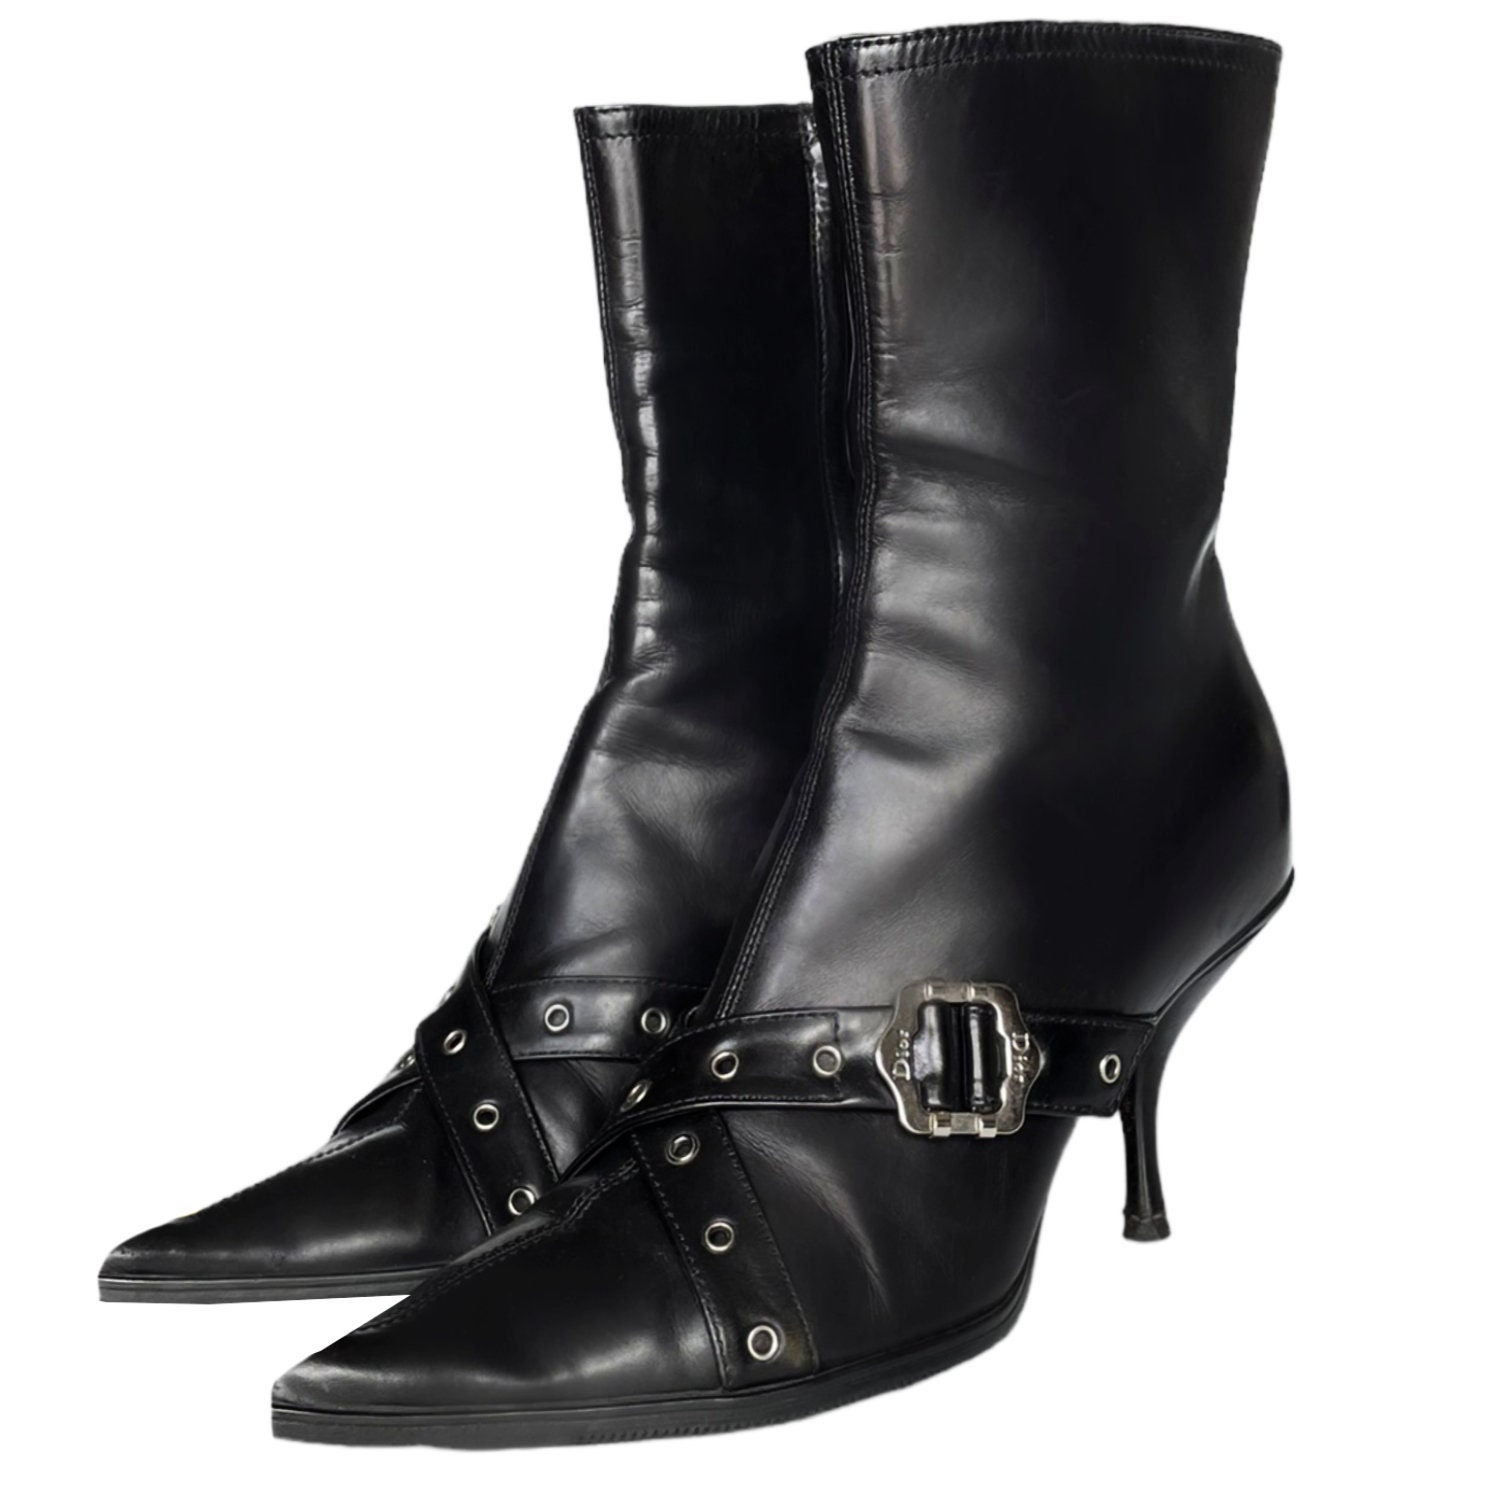 Dior - Authenticated Dior Empreinte Boots - Leather Black Plain for Women, Good Condition